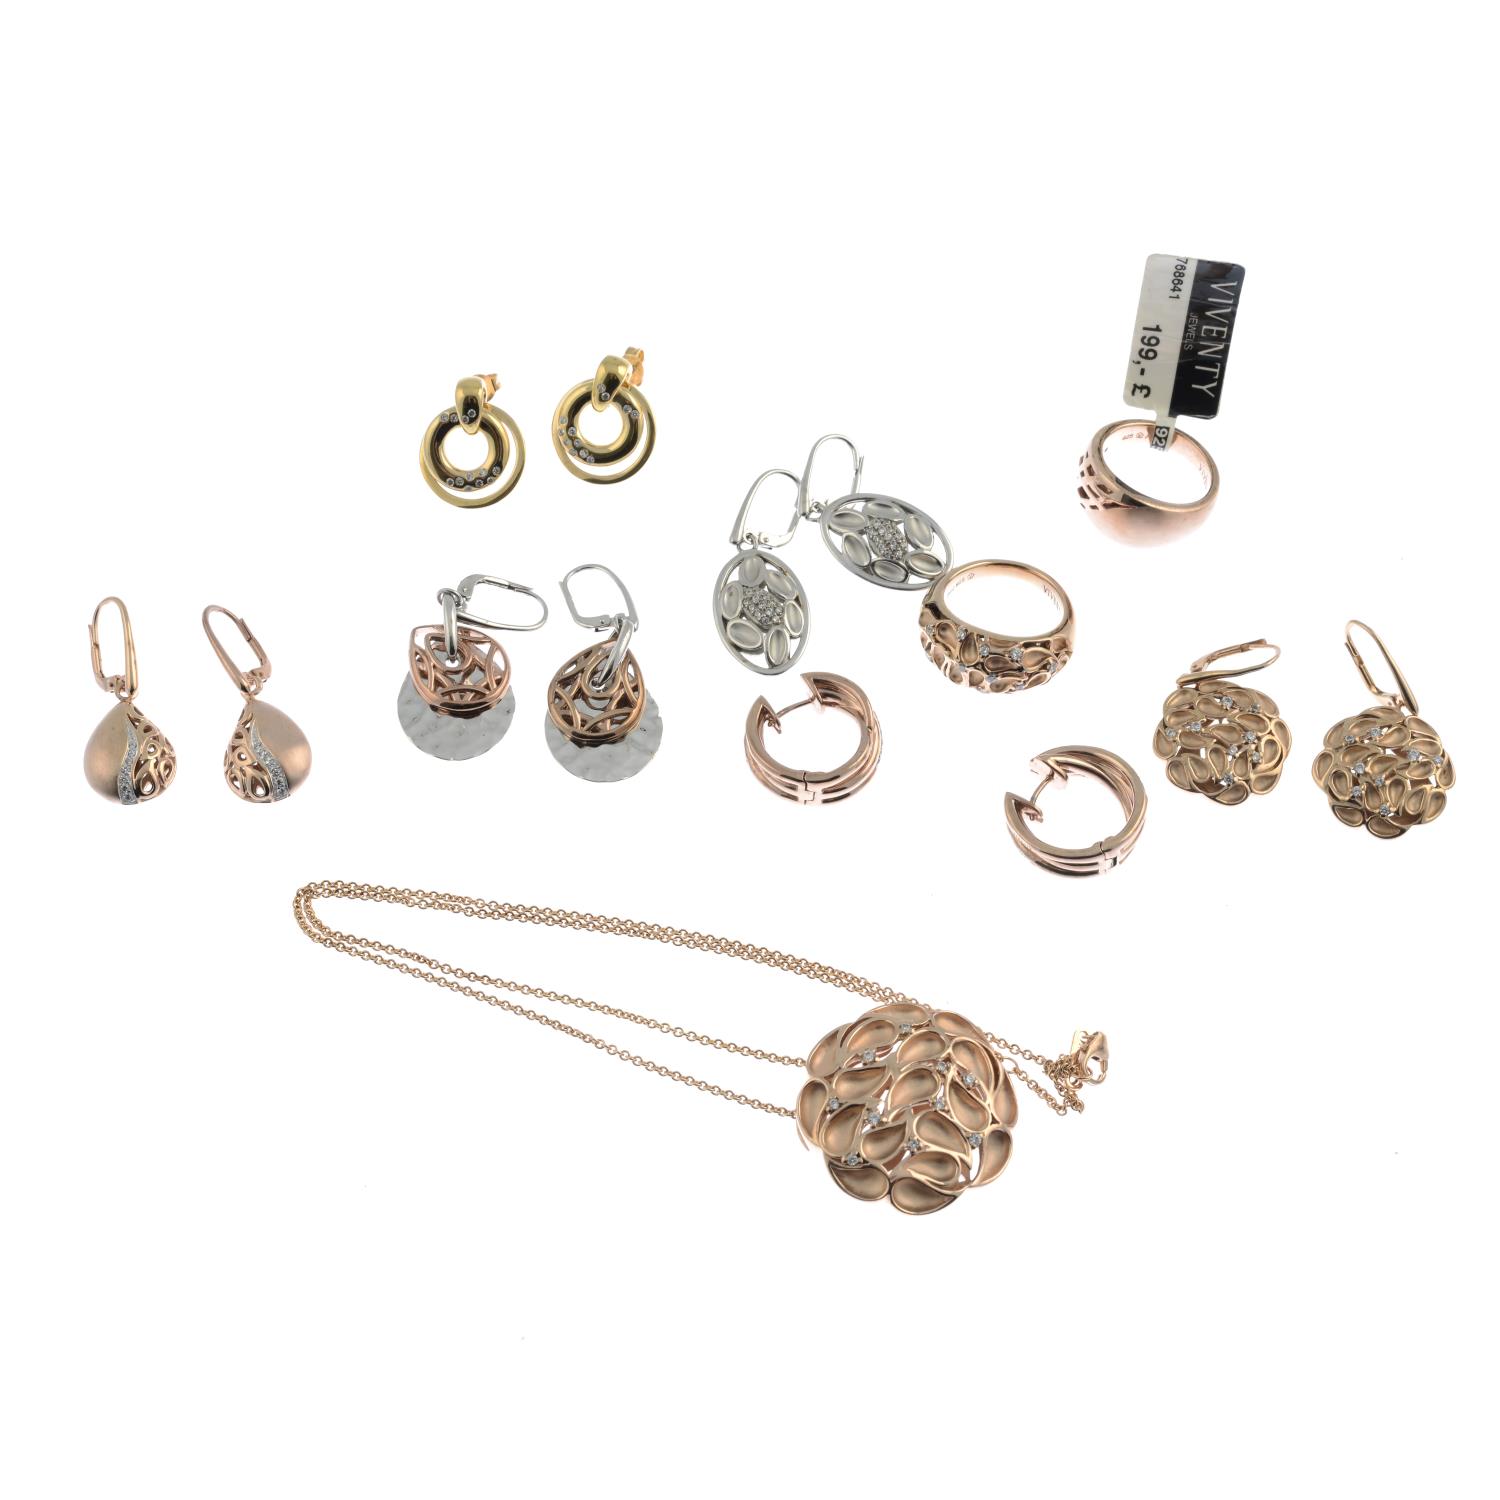 A selection of cubic zirconia jewellery, by Viventi.Signed Viventi. - Image 2 of 2